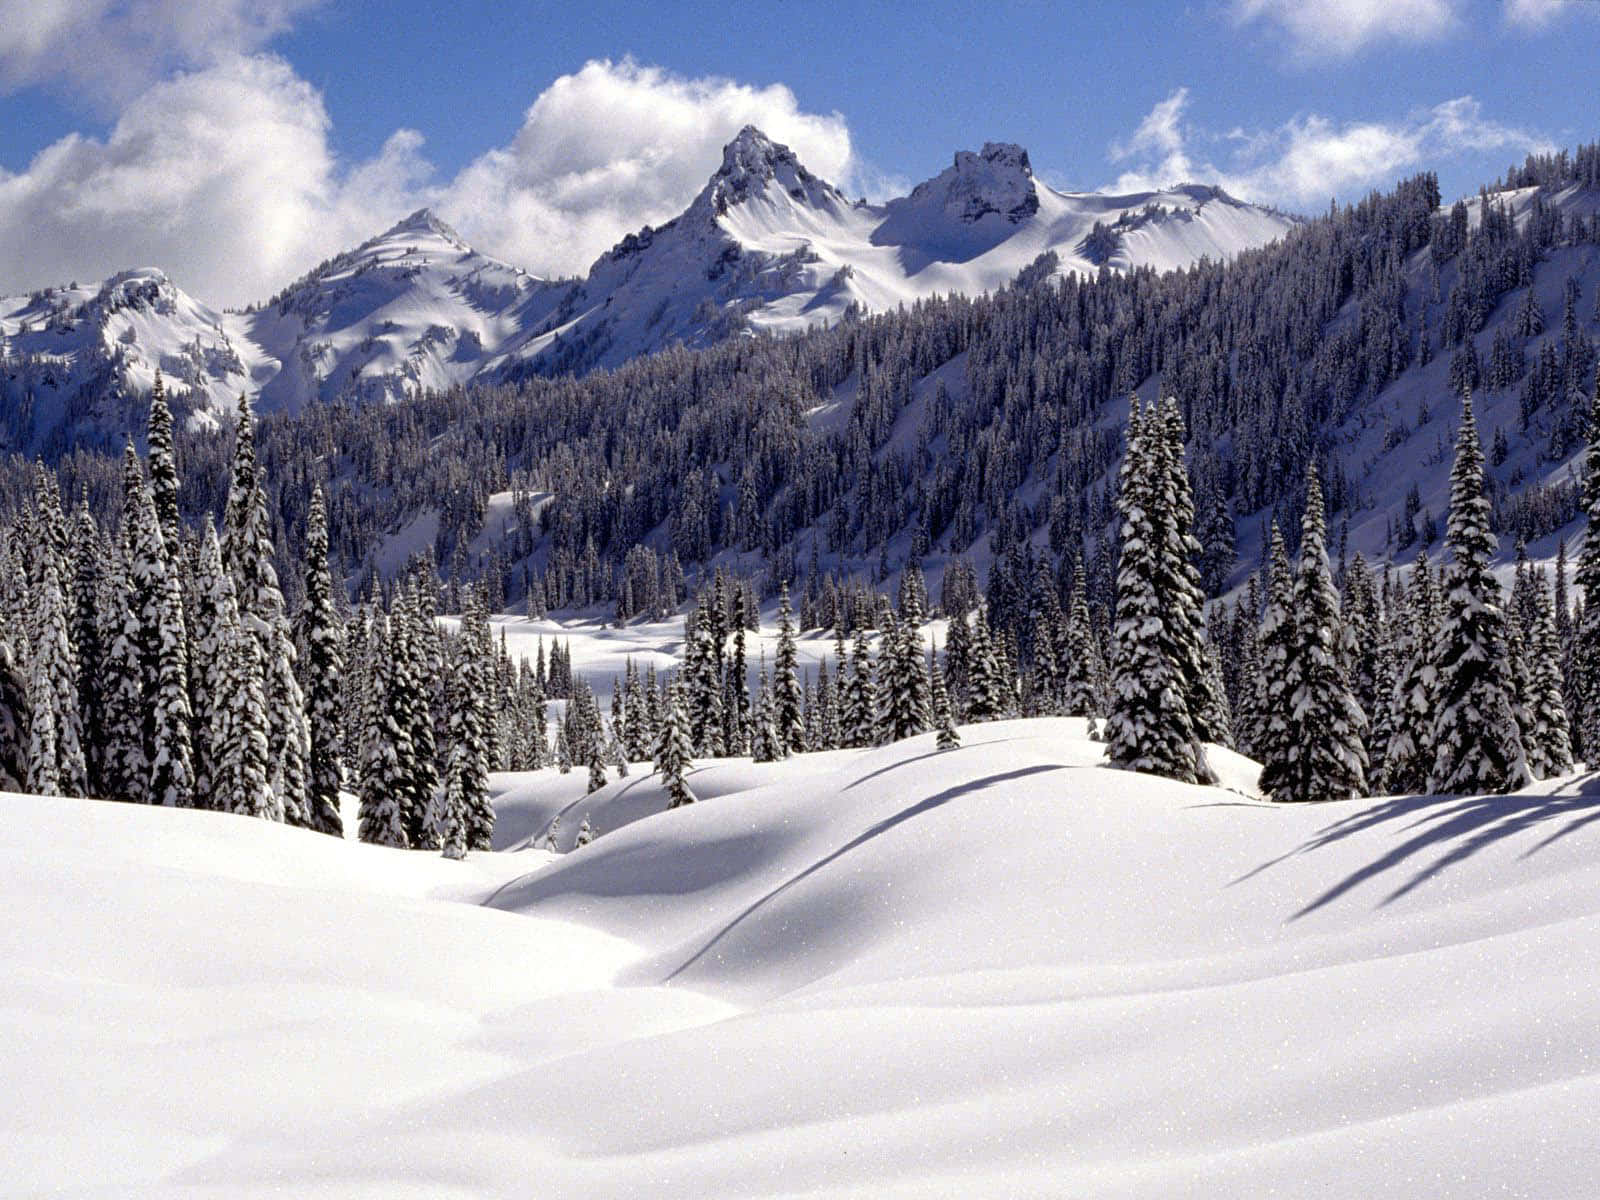 A beautiful winter landscape with snow-covered landscape